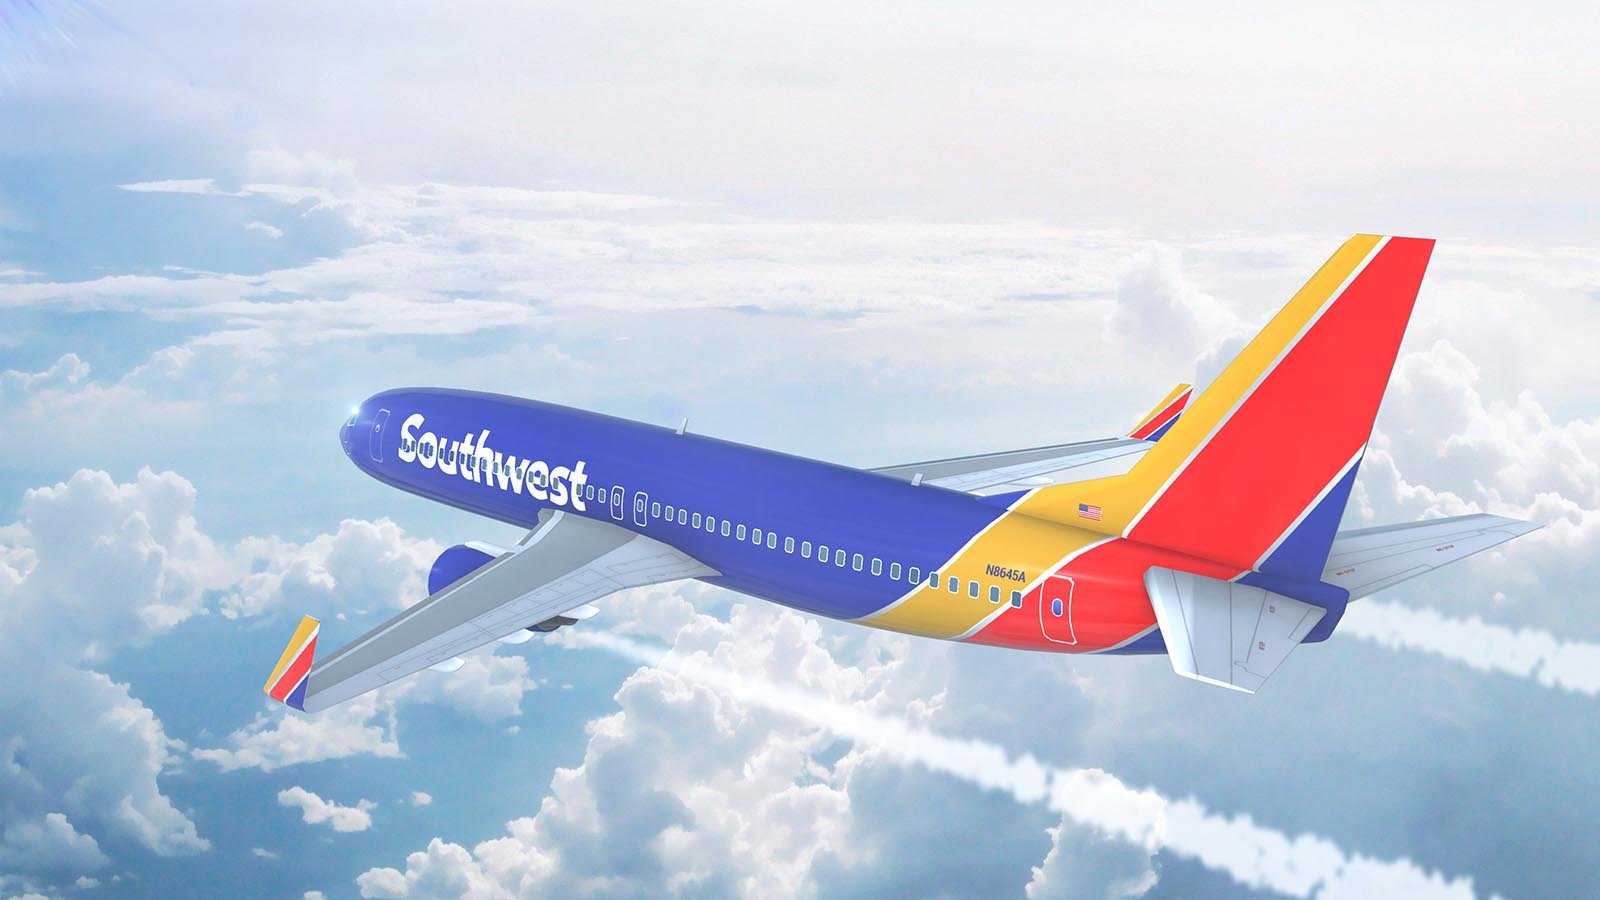 who owns southwest airlines